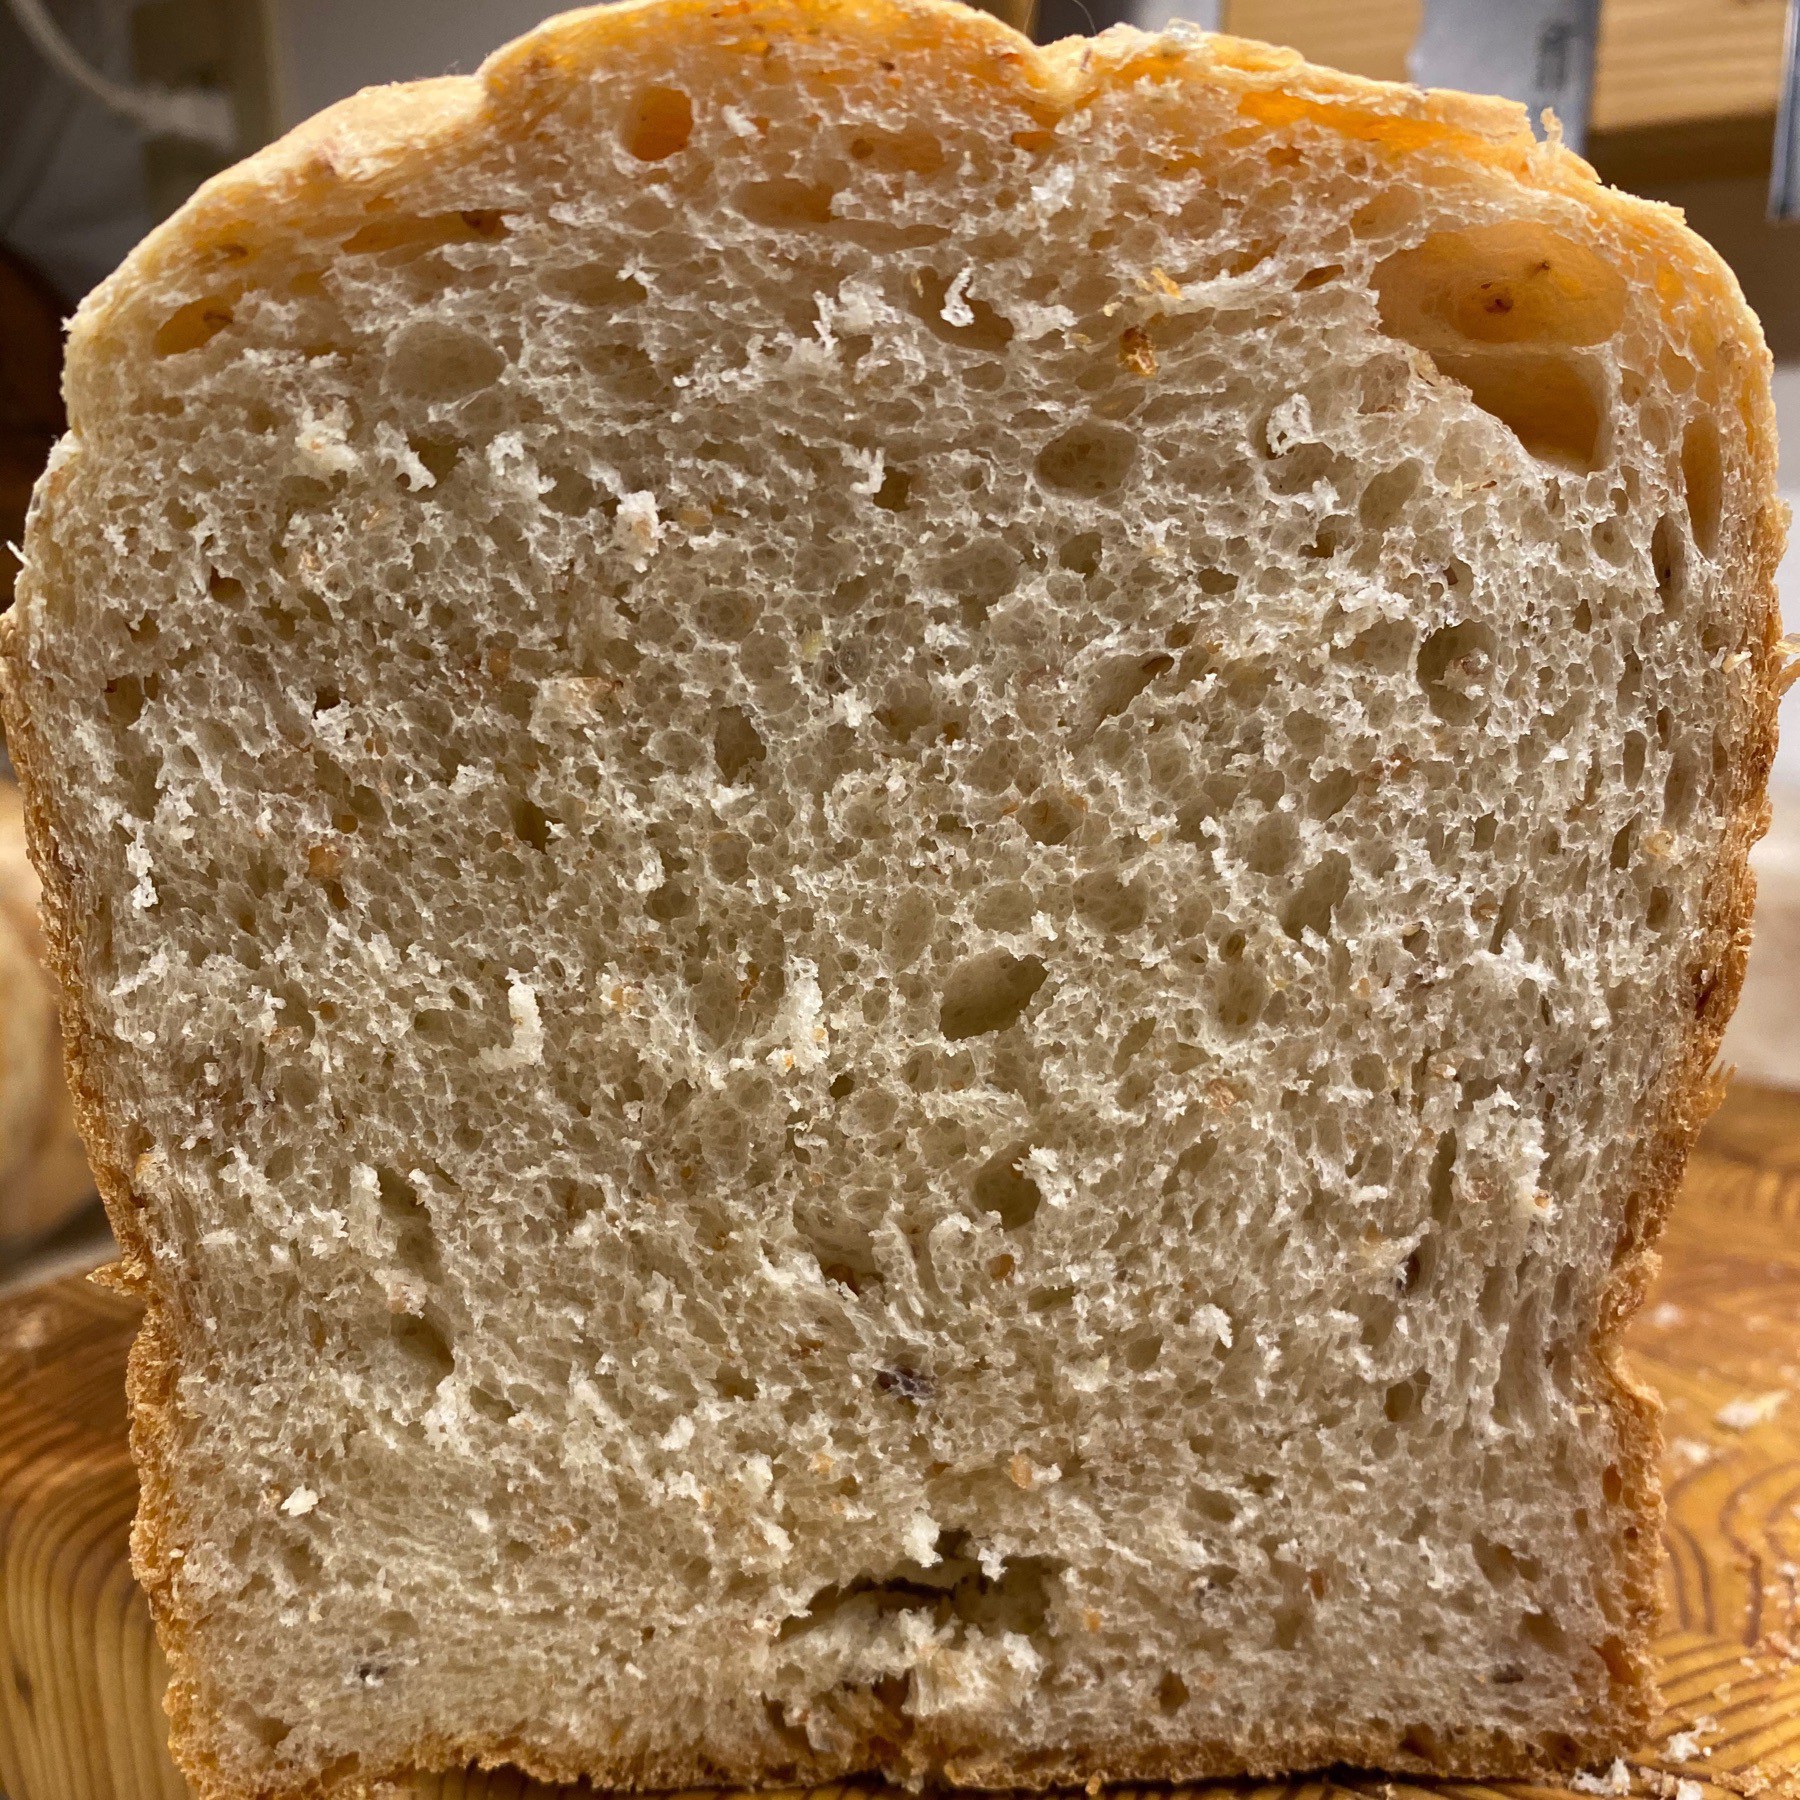 Cross section of bread.